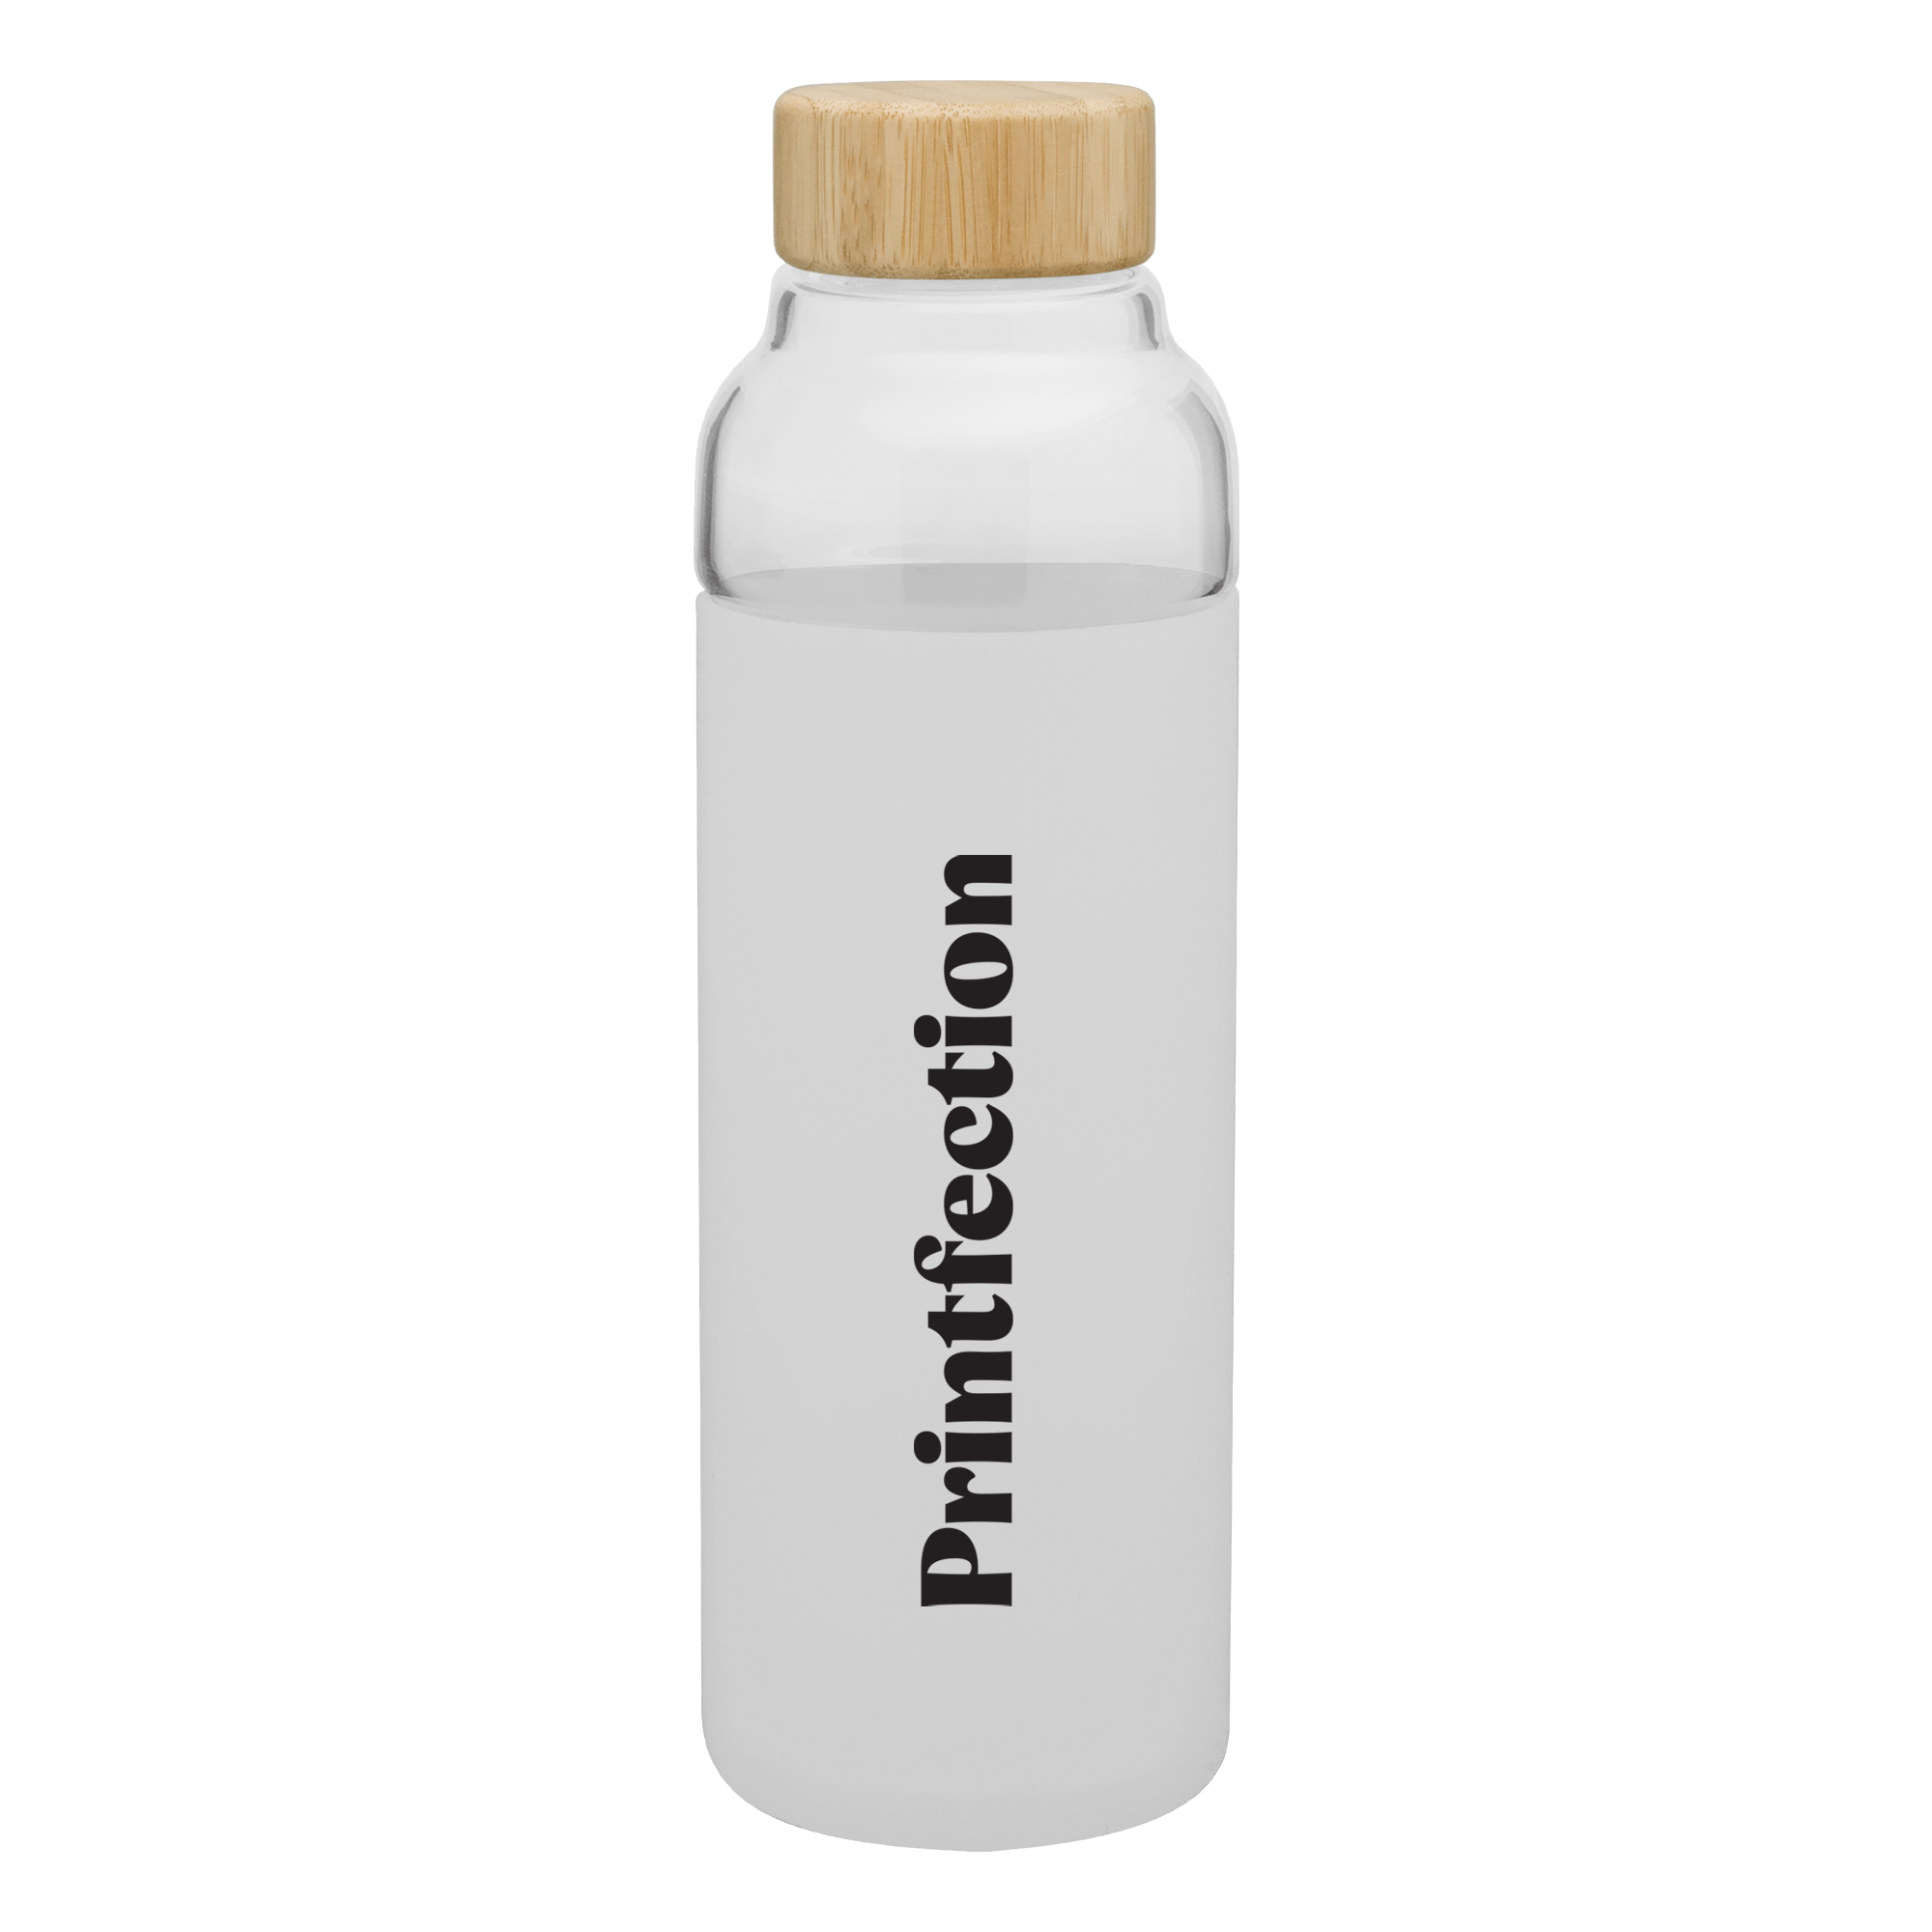 h2go bottle, a unique branded gift for employees 